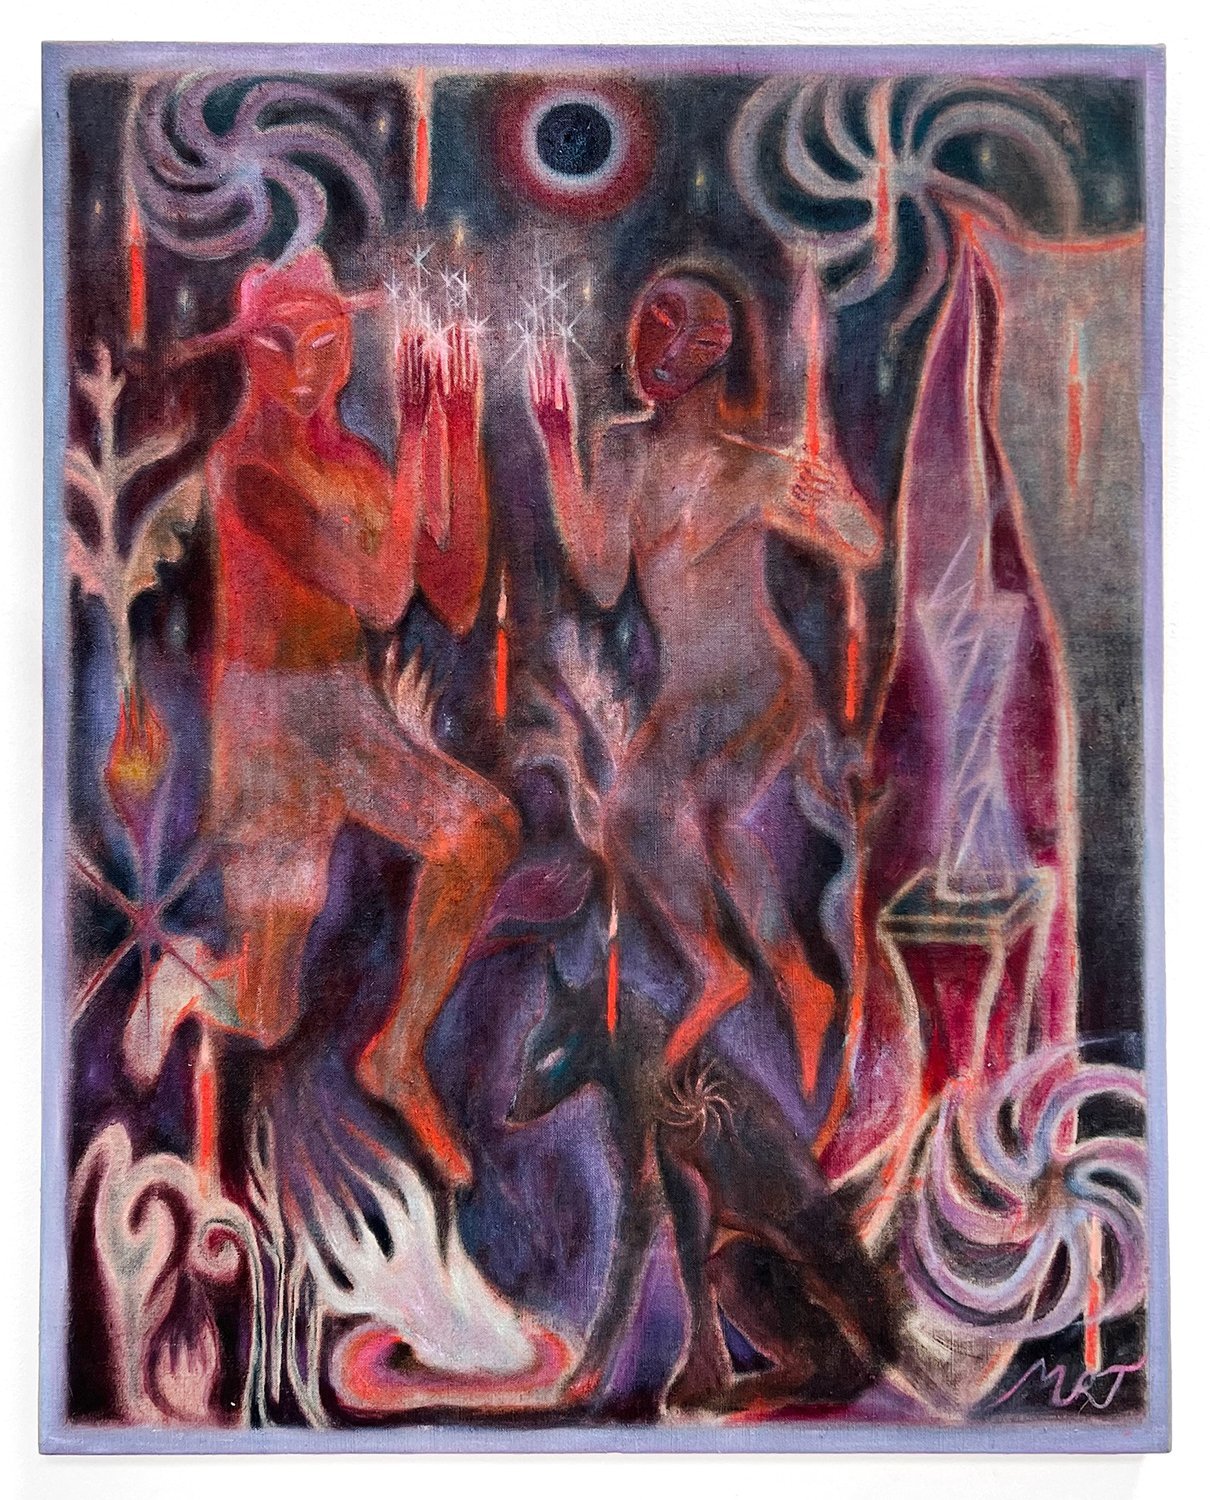 Margaret Thompson Fire Garden, 2022 Oil and wax on linen 34 x 27 inches.